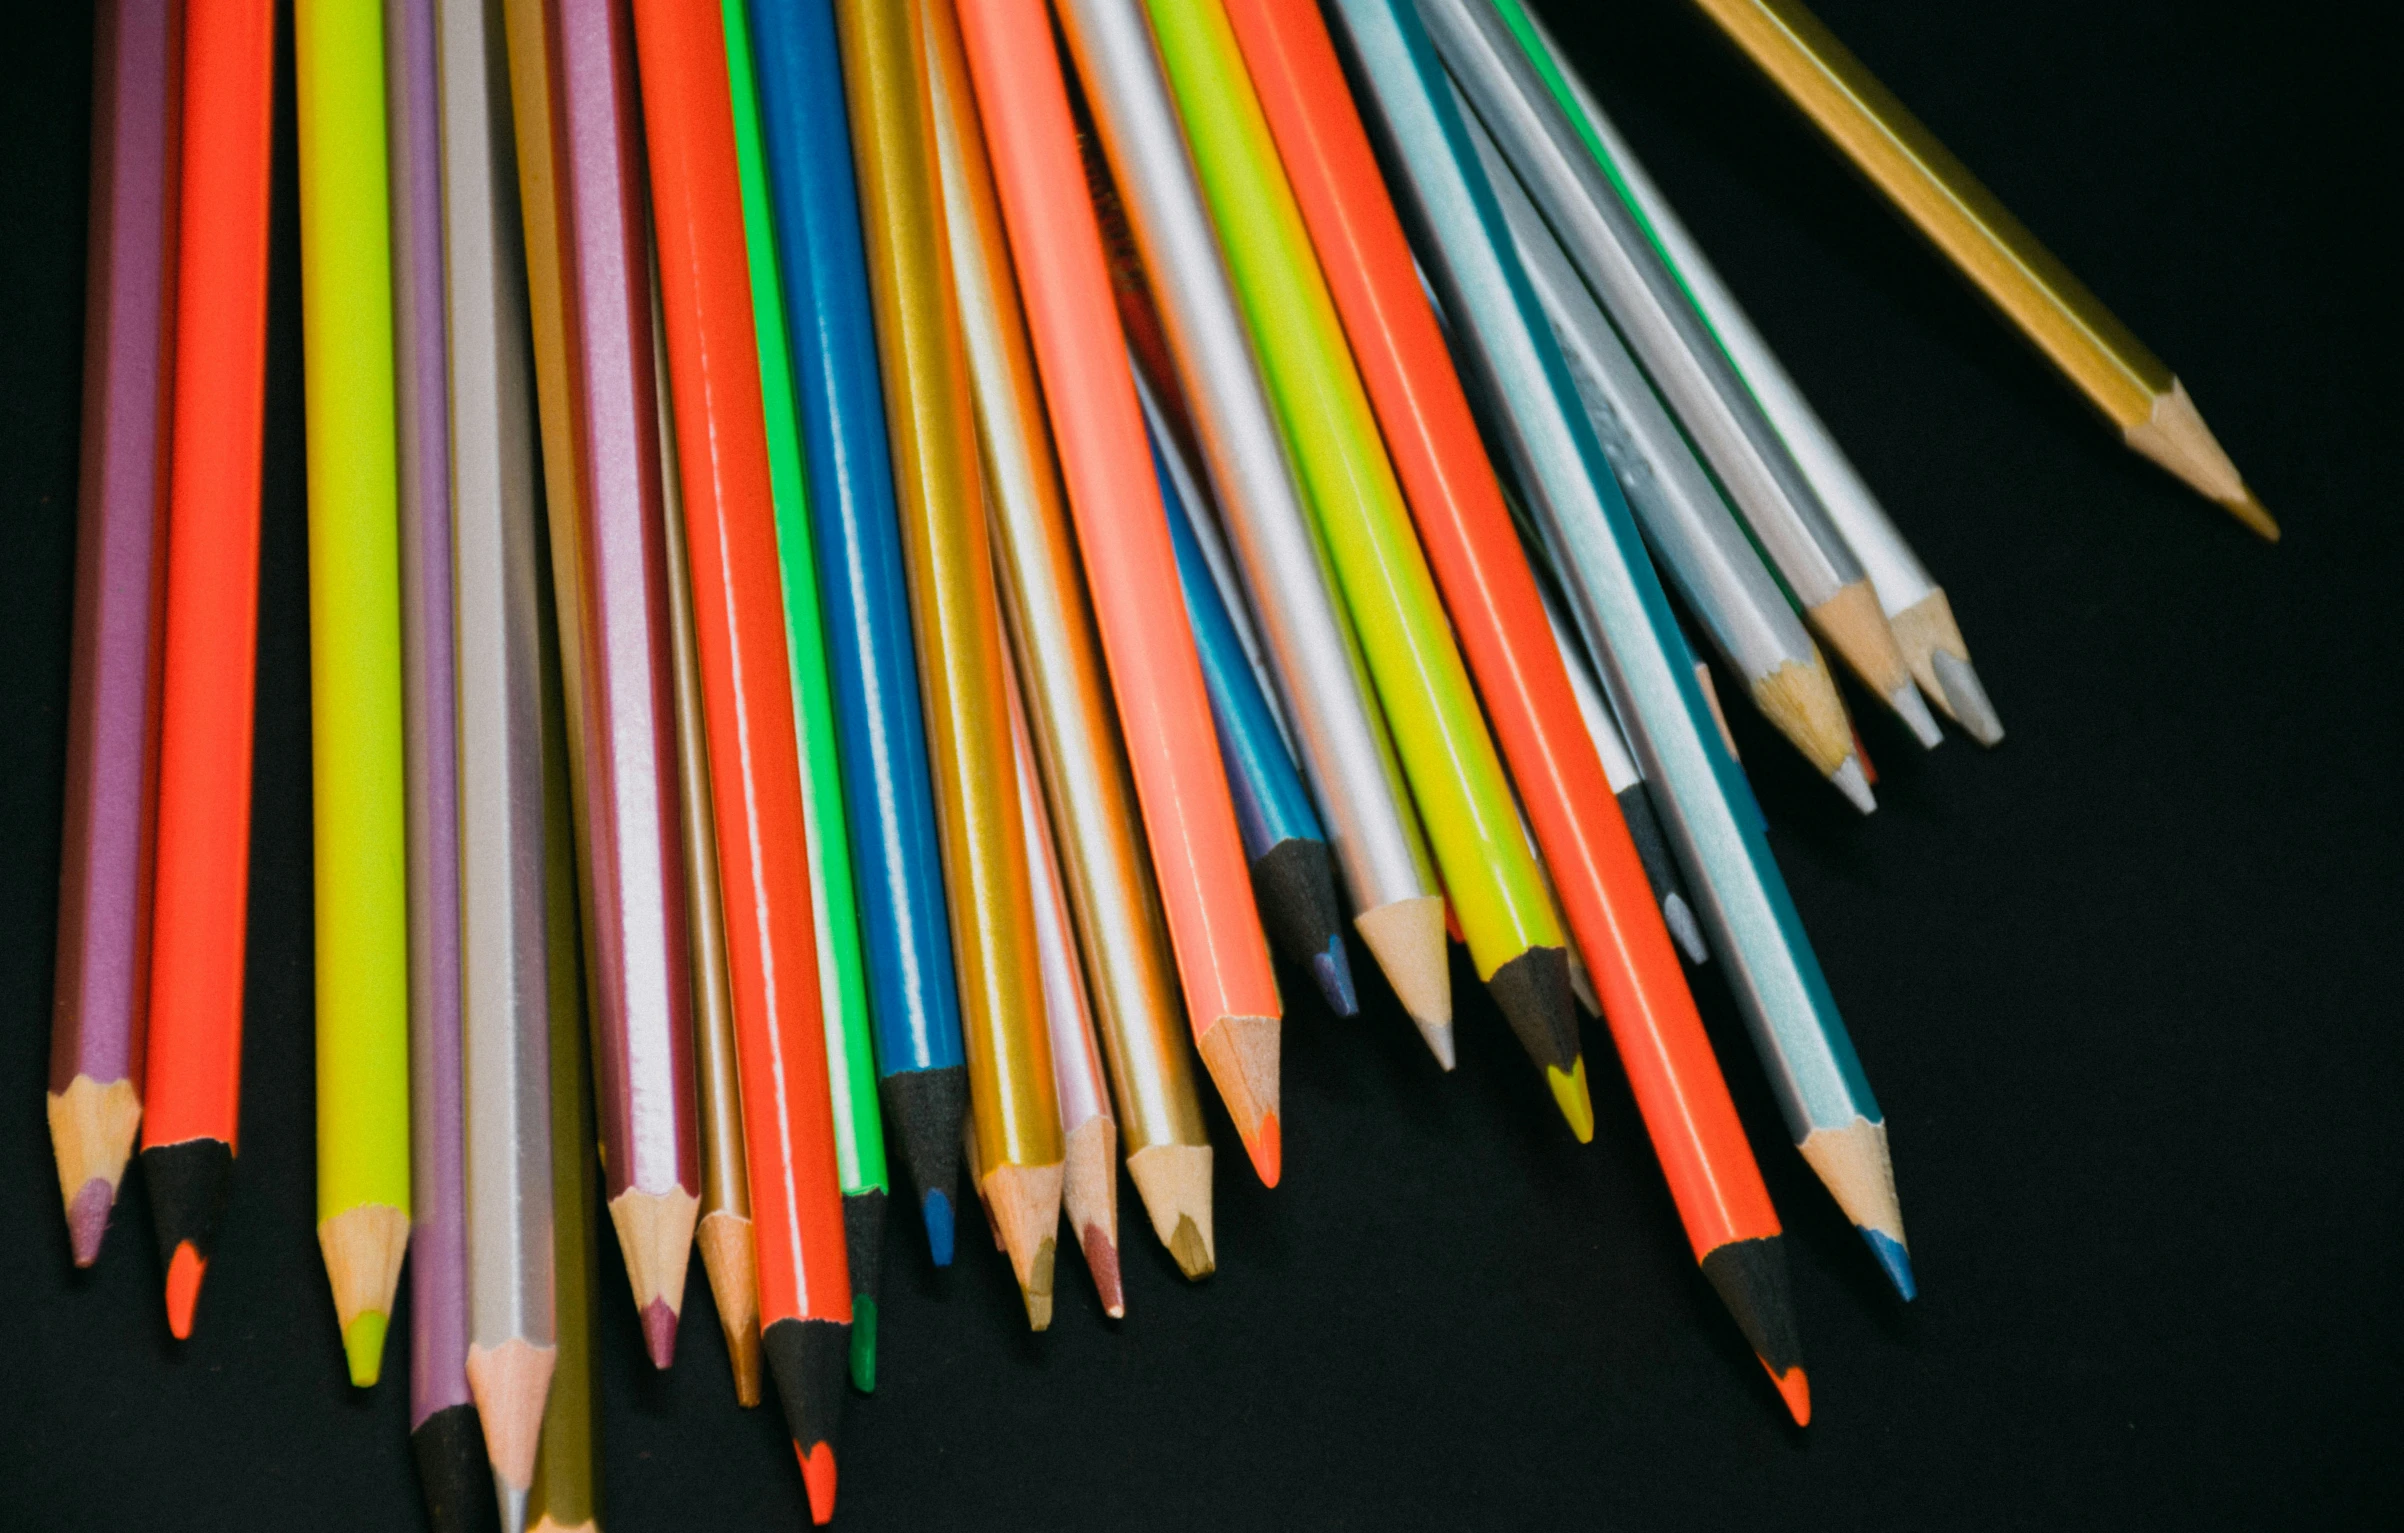 multicolored pencils lined up with one orange and yellow